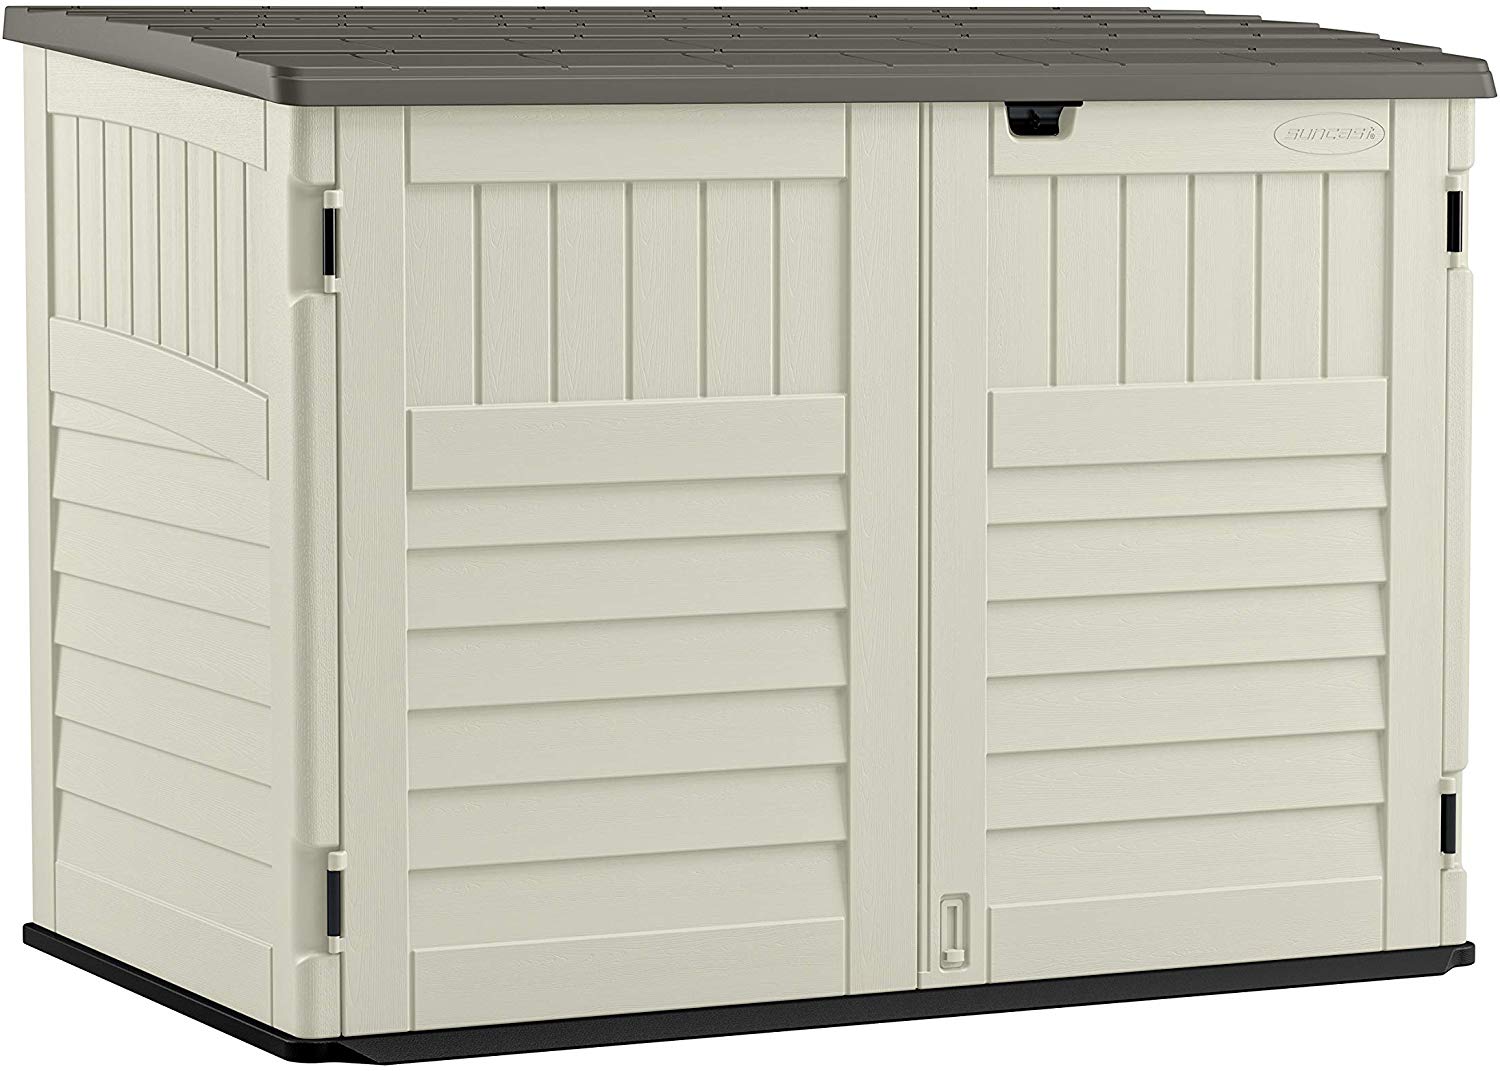 Suncast 5' x 3' Horizontal Stow-Away Storage Shed - Natural Wood-like Outdoor Storage